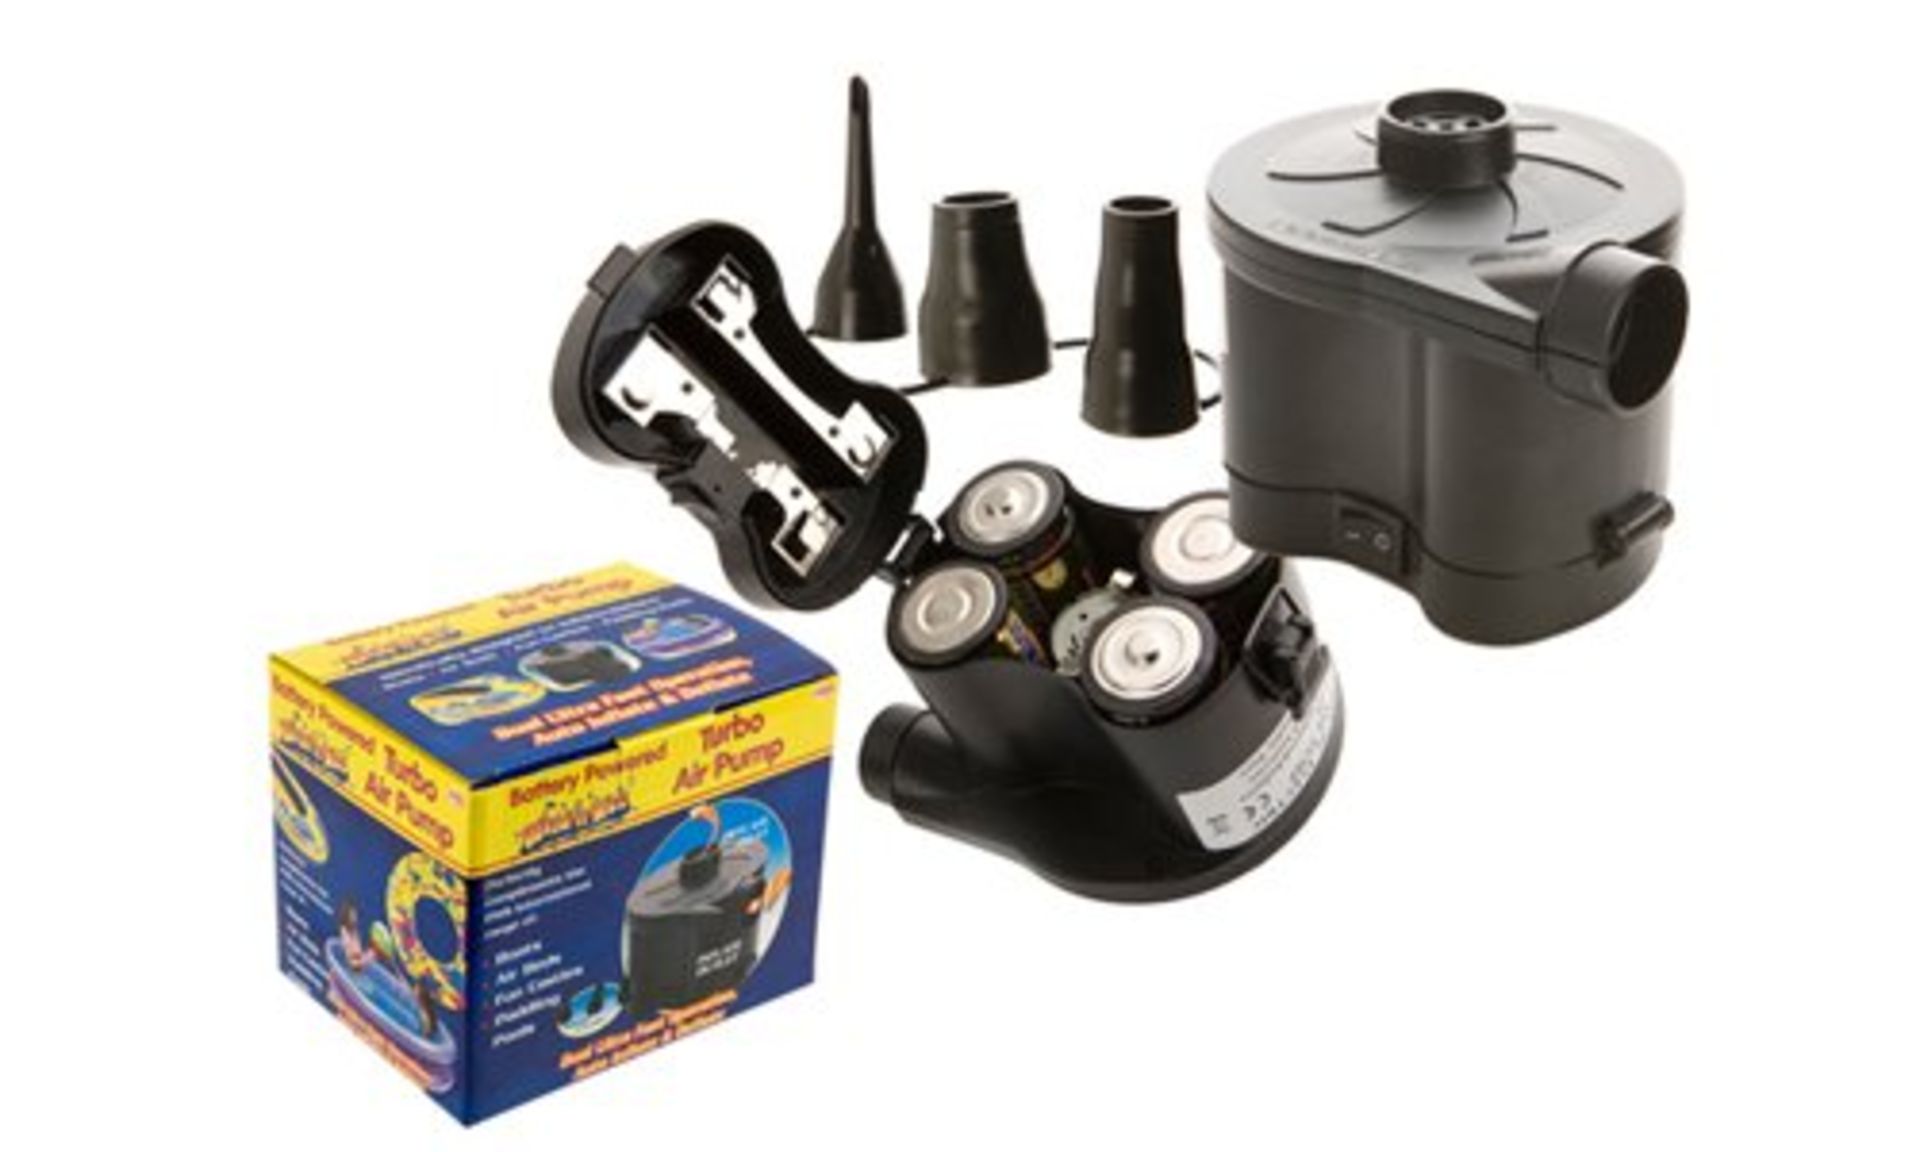 V *TRADE QTY* Brand New 6V Battery Operated Air Pump X 3 YOUR BID PRICE TO BE MULTIPLIED BY THREE